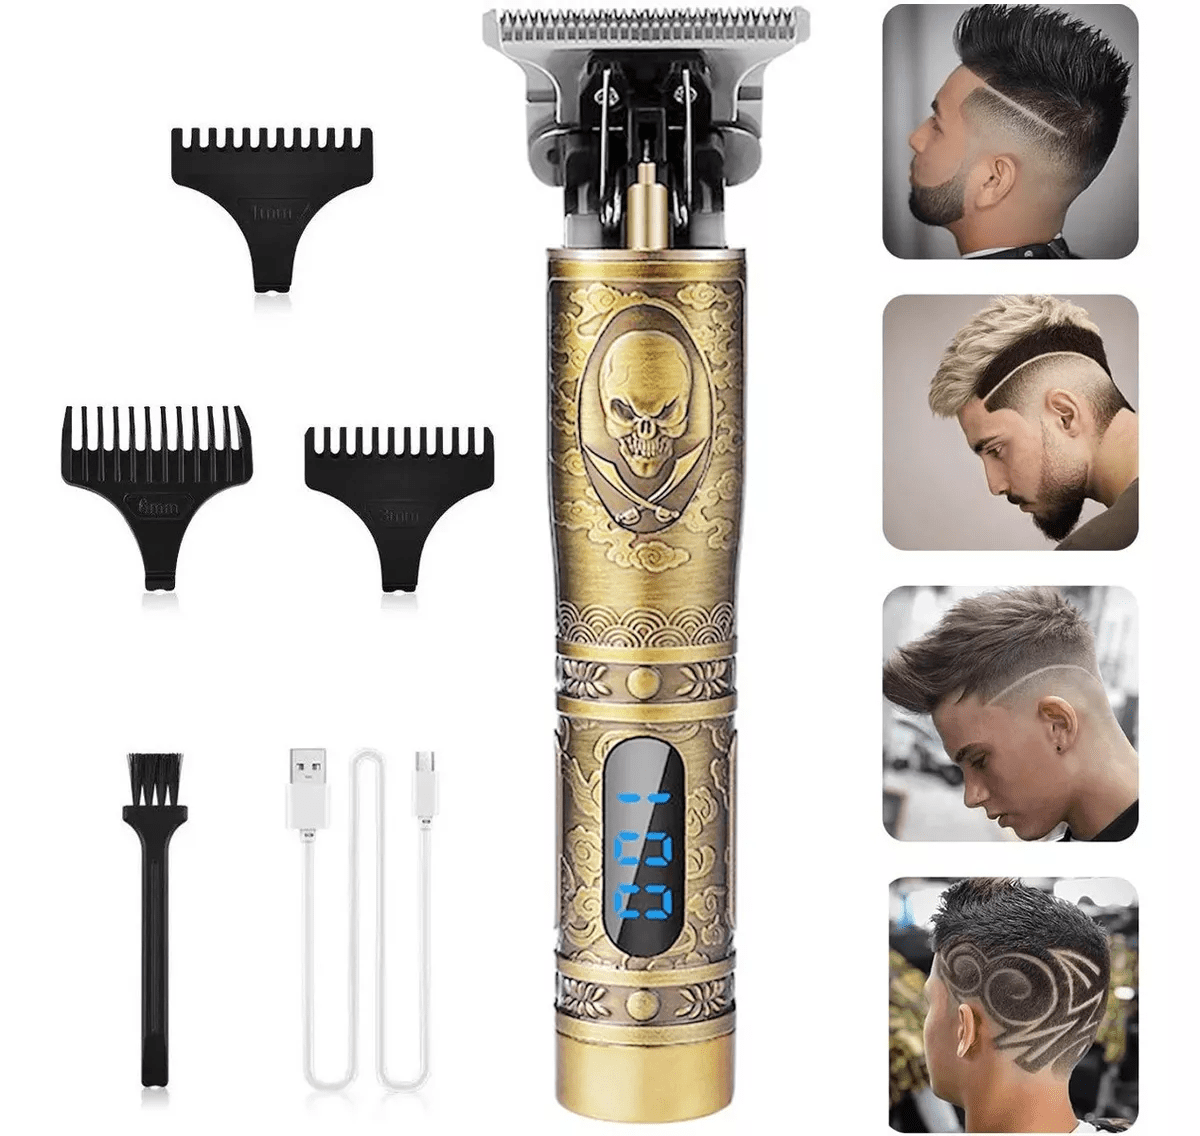 Professional Mens Hair Clippers, Beard Trimmer Barber Hair Cut Grooming Kit, Zero Gapped Trimmers, Hair Clippers for Men, Rechargeable Close Cutting T